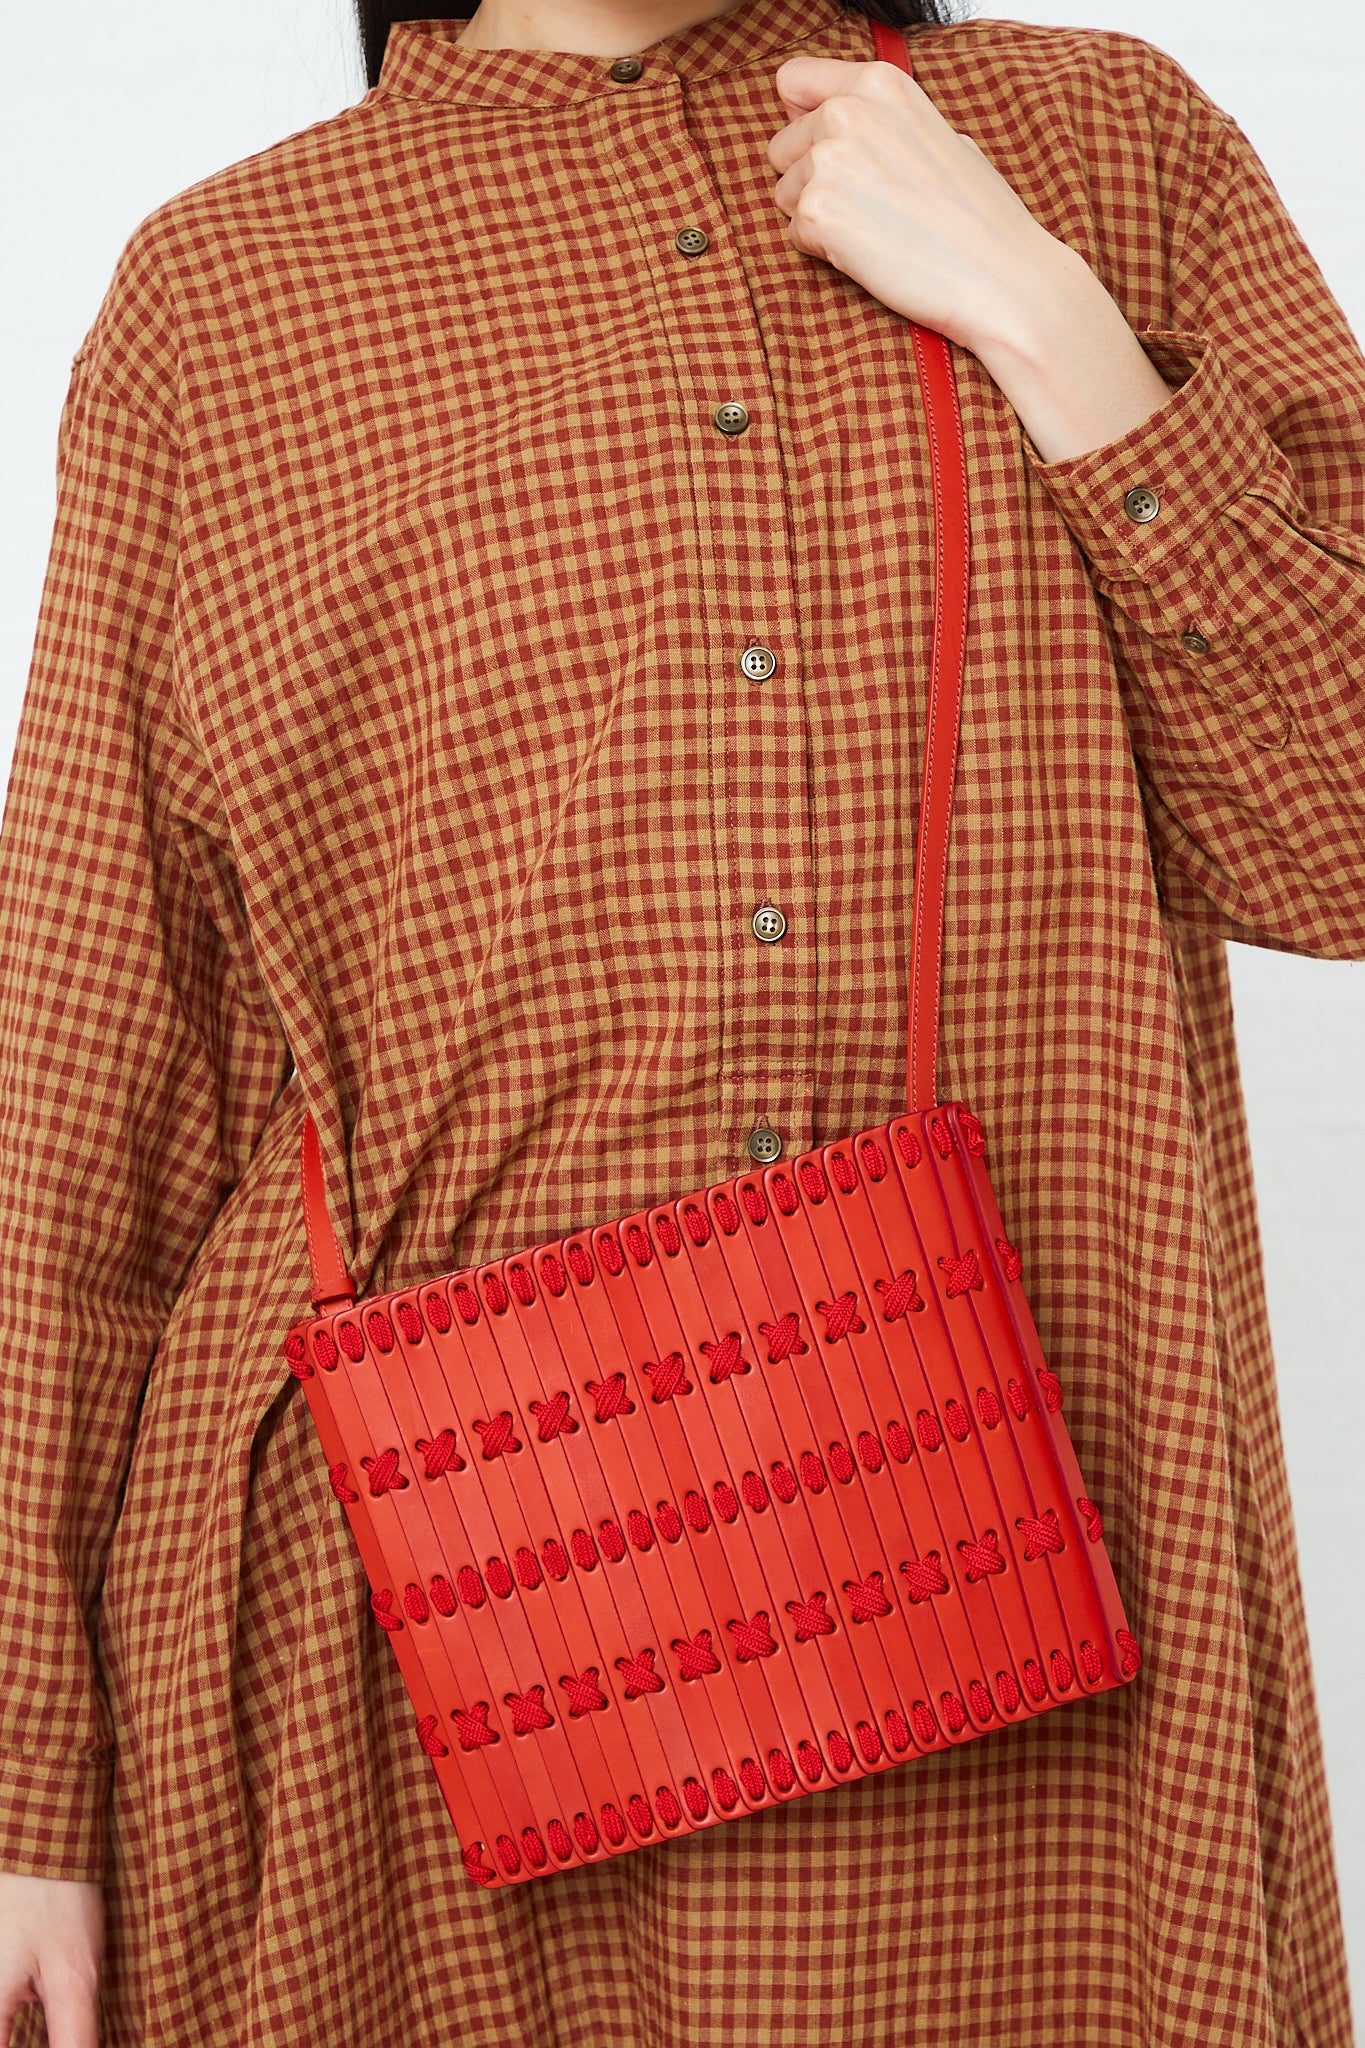 A woman in a plaid shirt is holding a handcrafted Hatori Crossbody Bag 46 in Amaranto and Ruby.